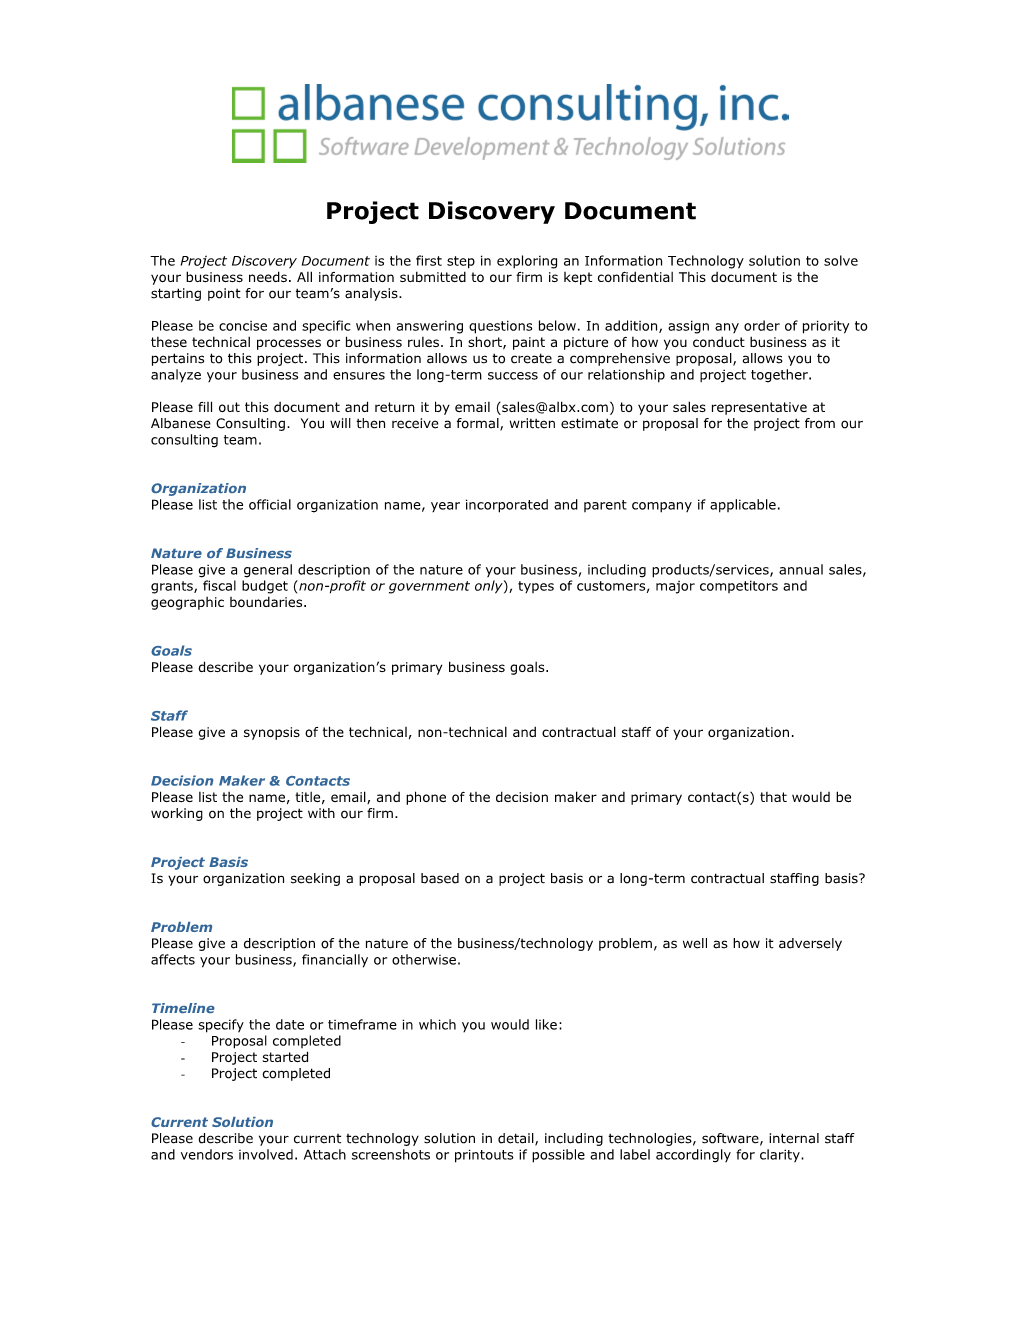 Project Discovery Document